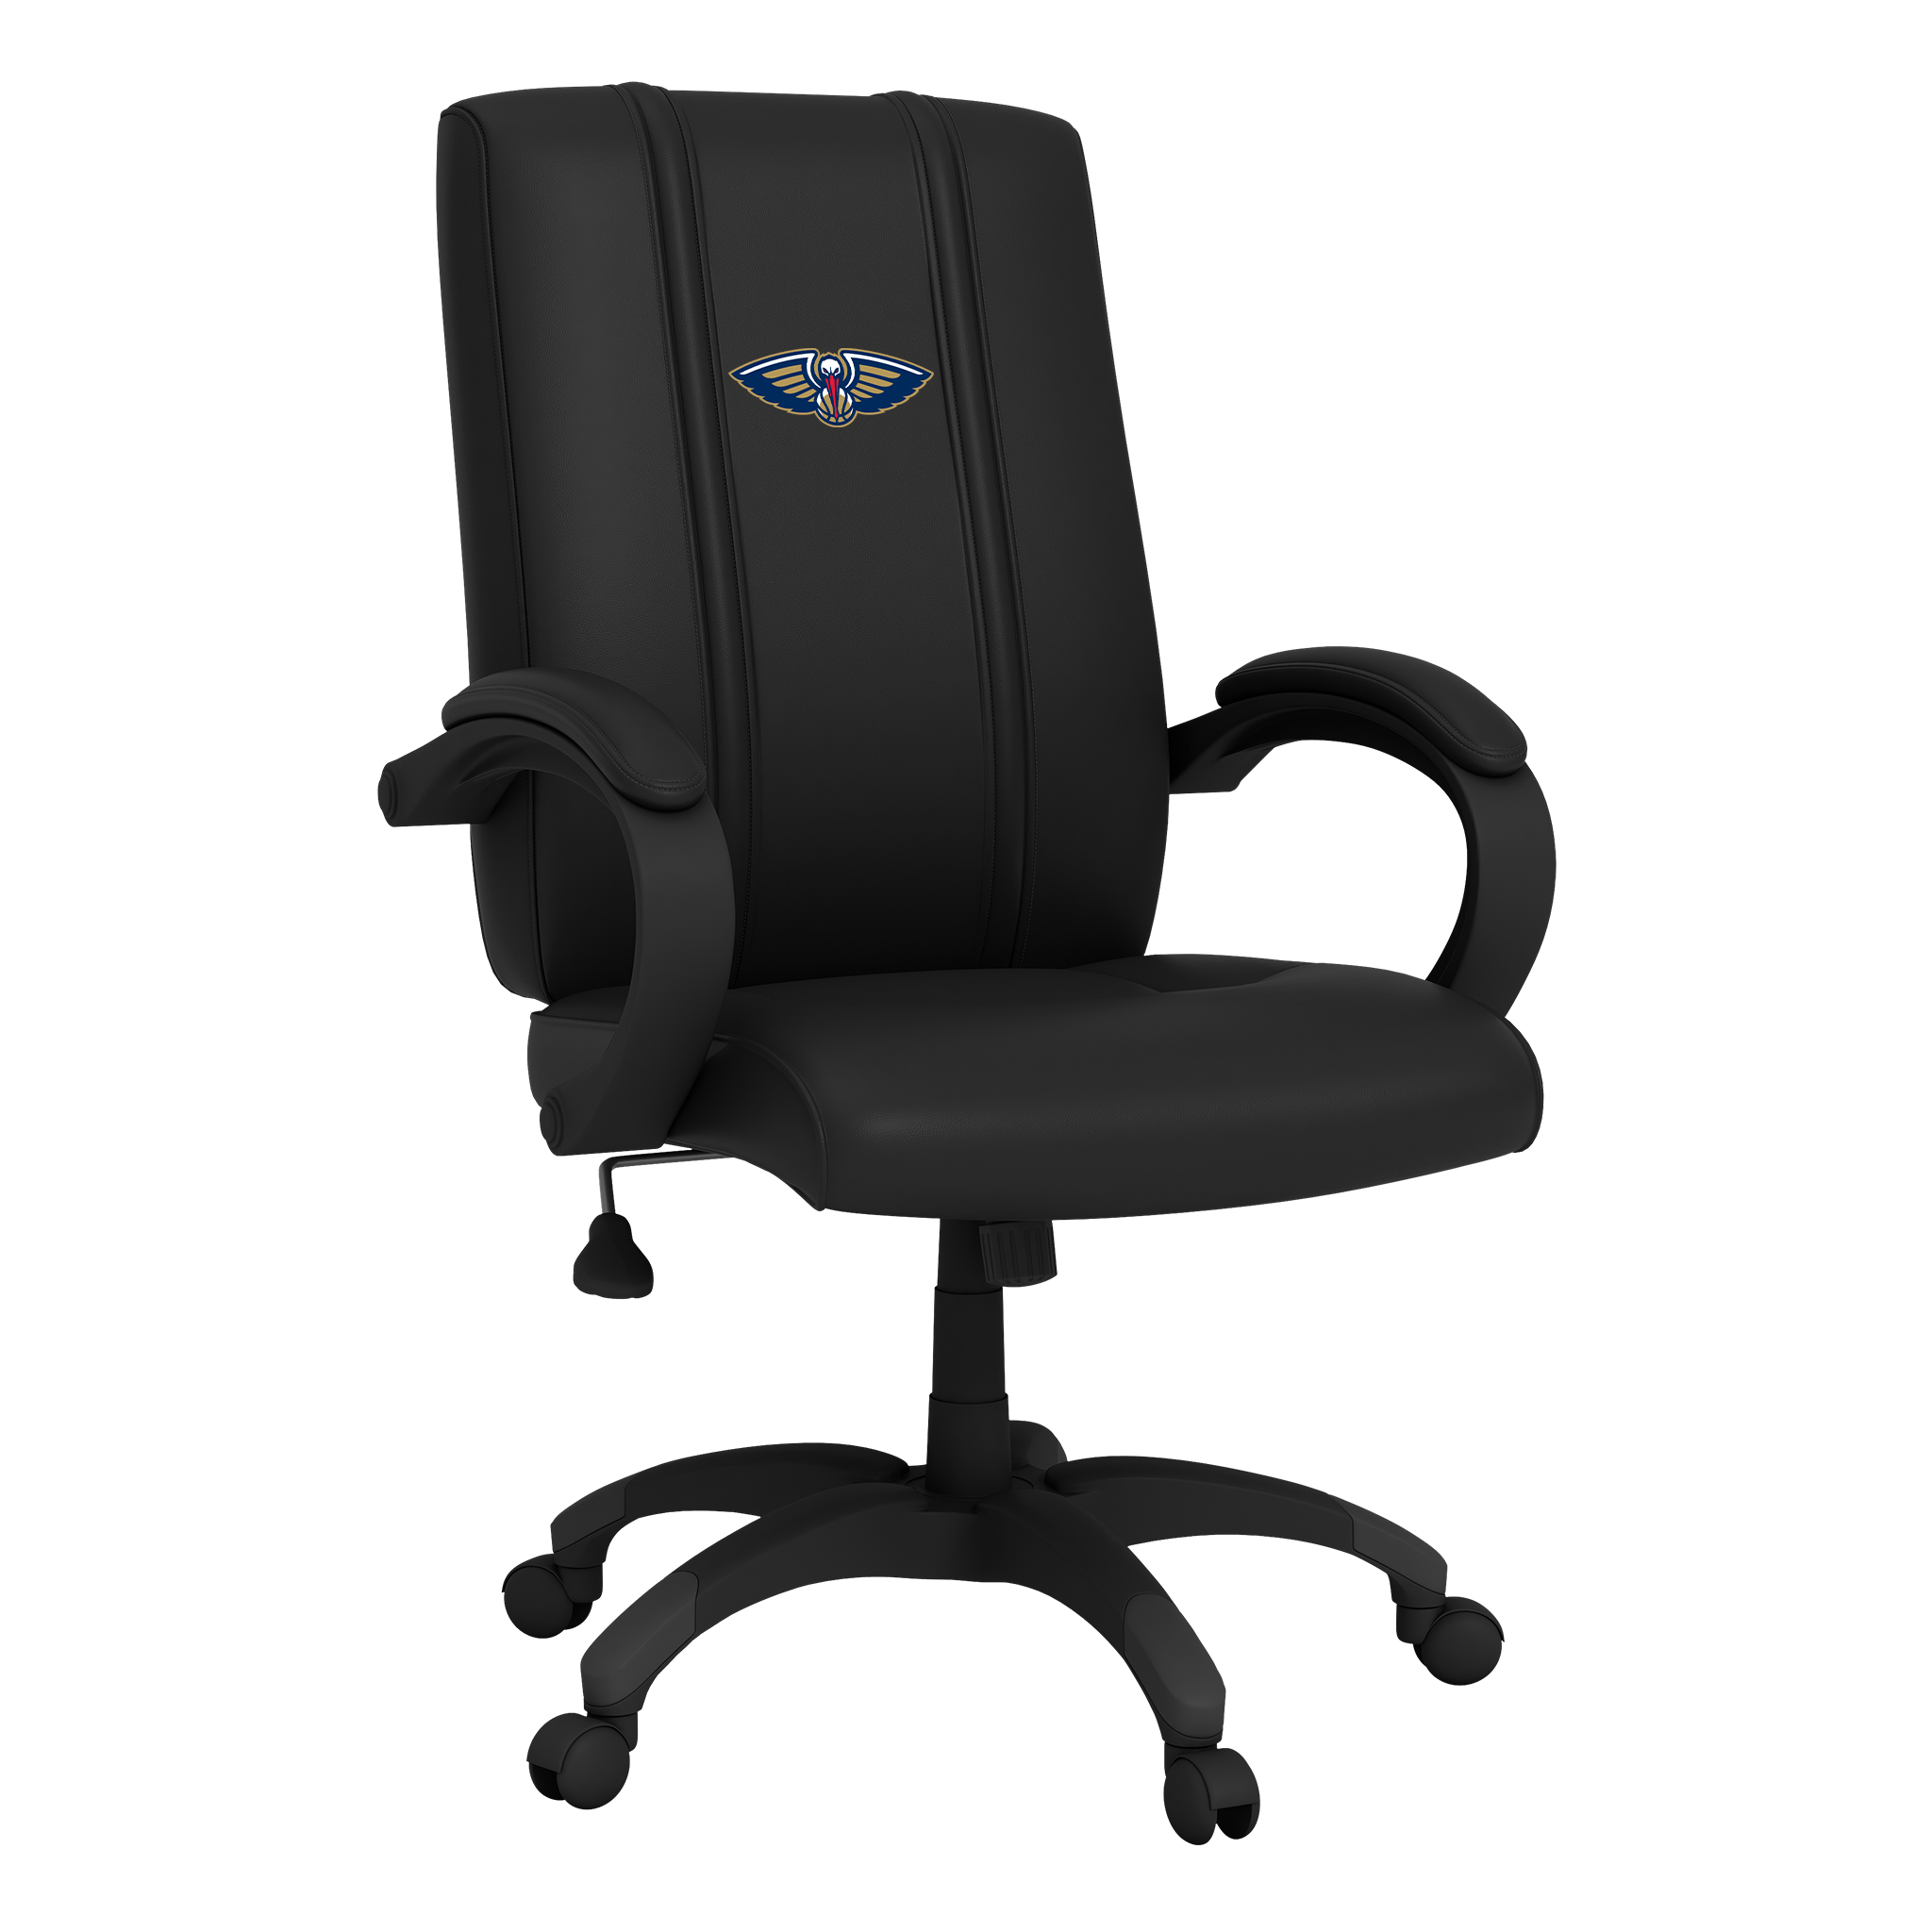 New Orleans Pelicans Office Chair 1000 with New Orleans Pelicans Primary Logo